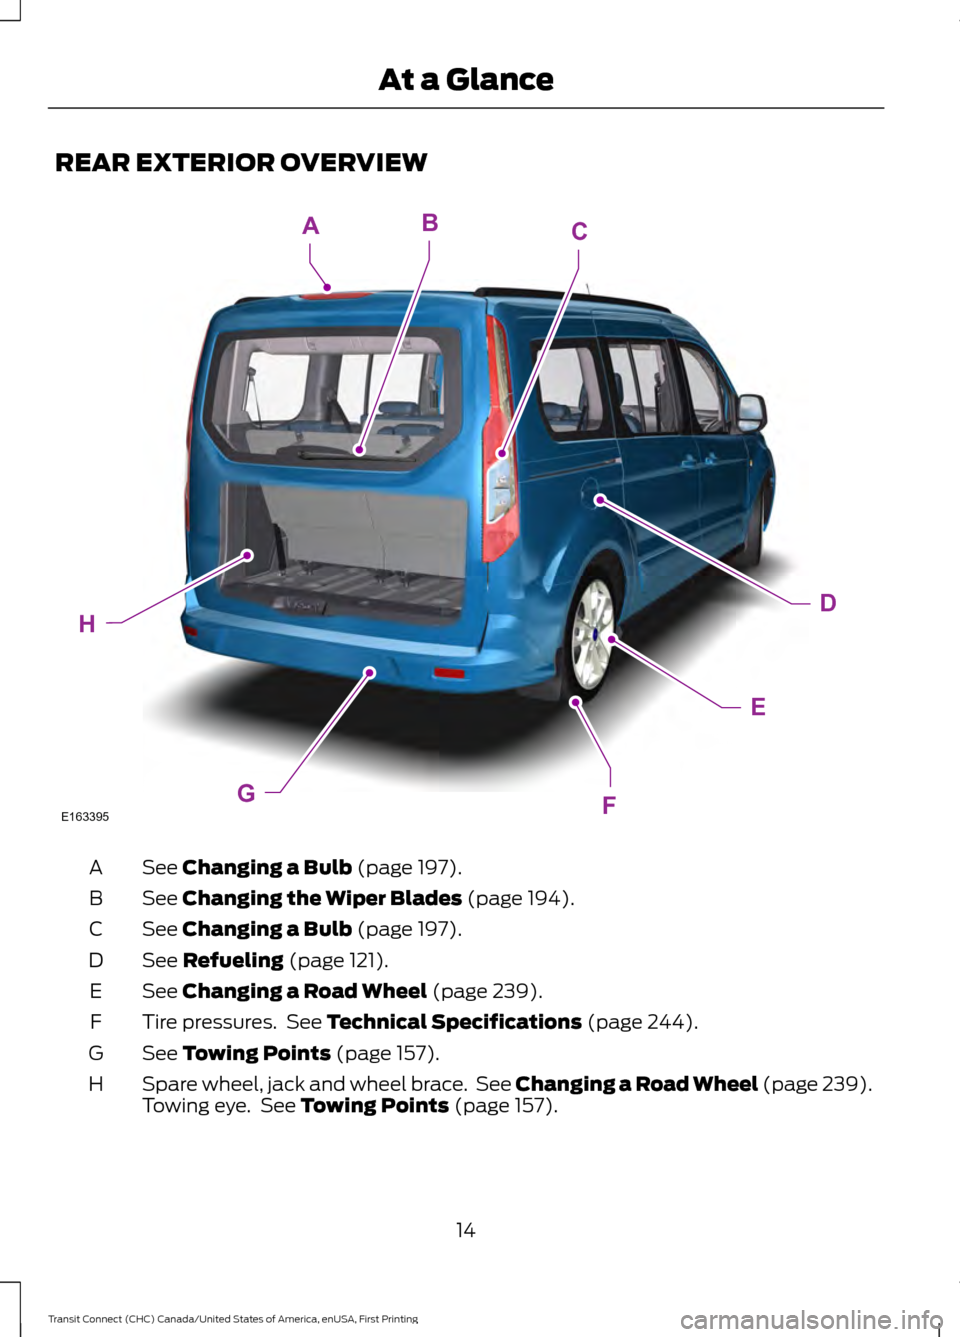 FORD TRANSIT CONNECT 2015 2.G User Guide REAR EXTERIOR OVERVIEW
See Changing a Bulb (page 197).
A
See 
Changing the Wiper Blades (page 194).
B
See 
Changing a Bulb (page 197).
C
See 
Refueling (page 121).
D
See 
Changing a Road Wheel (page 2